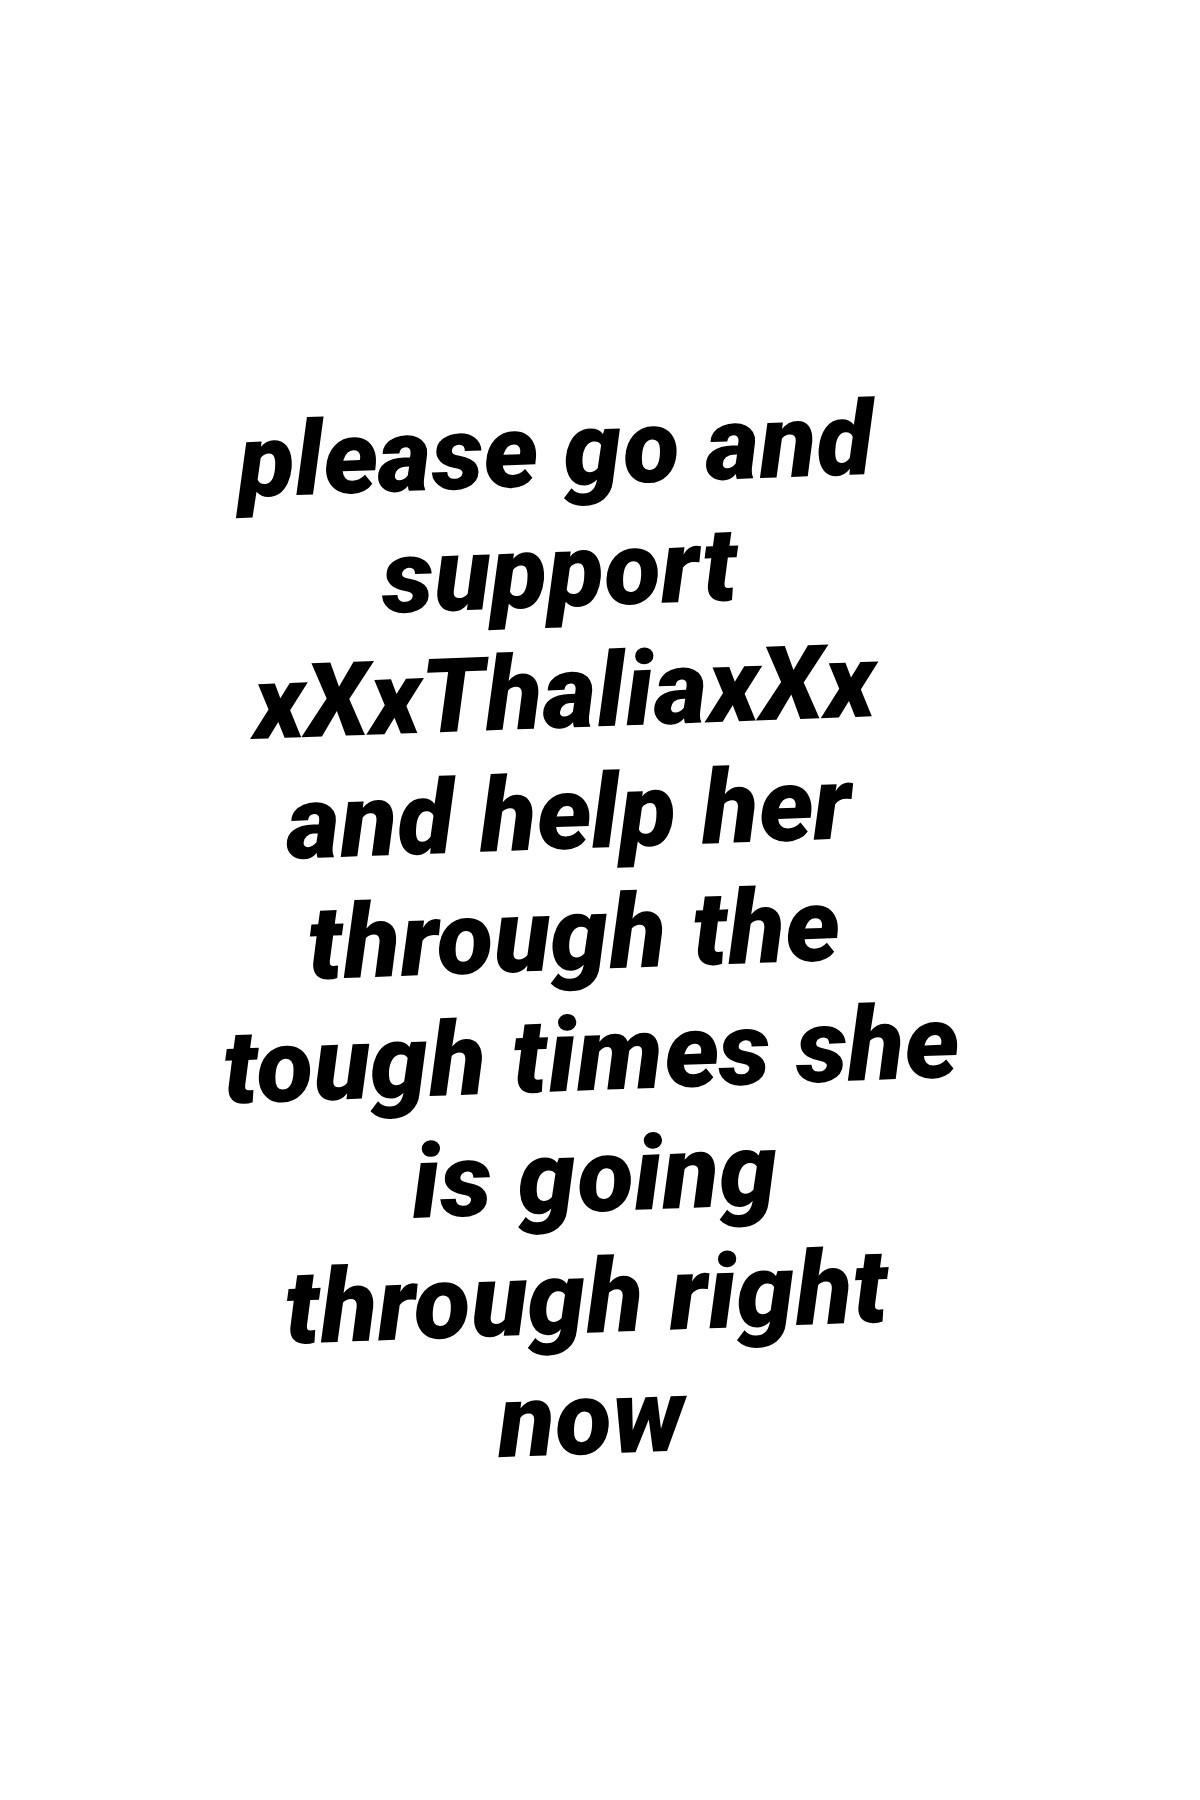 please go and support her